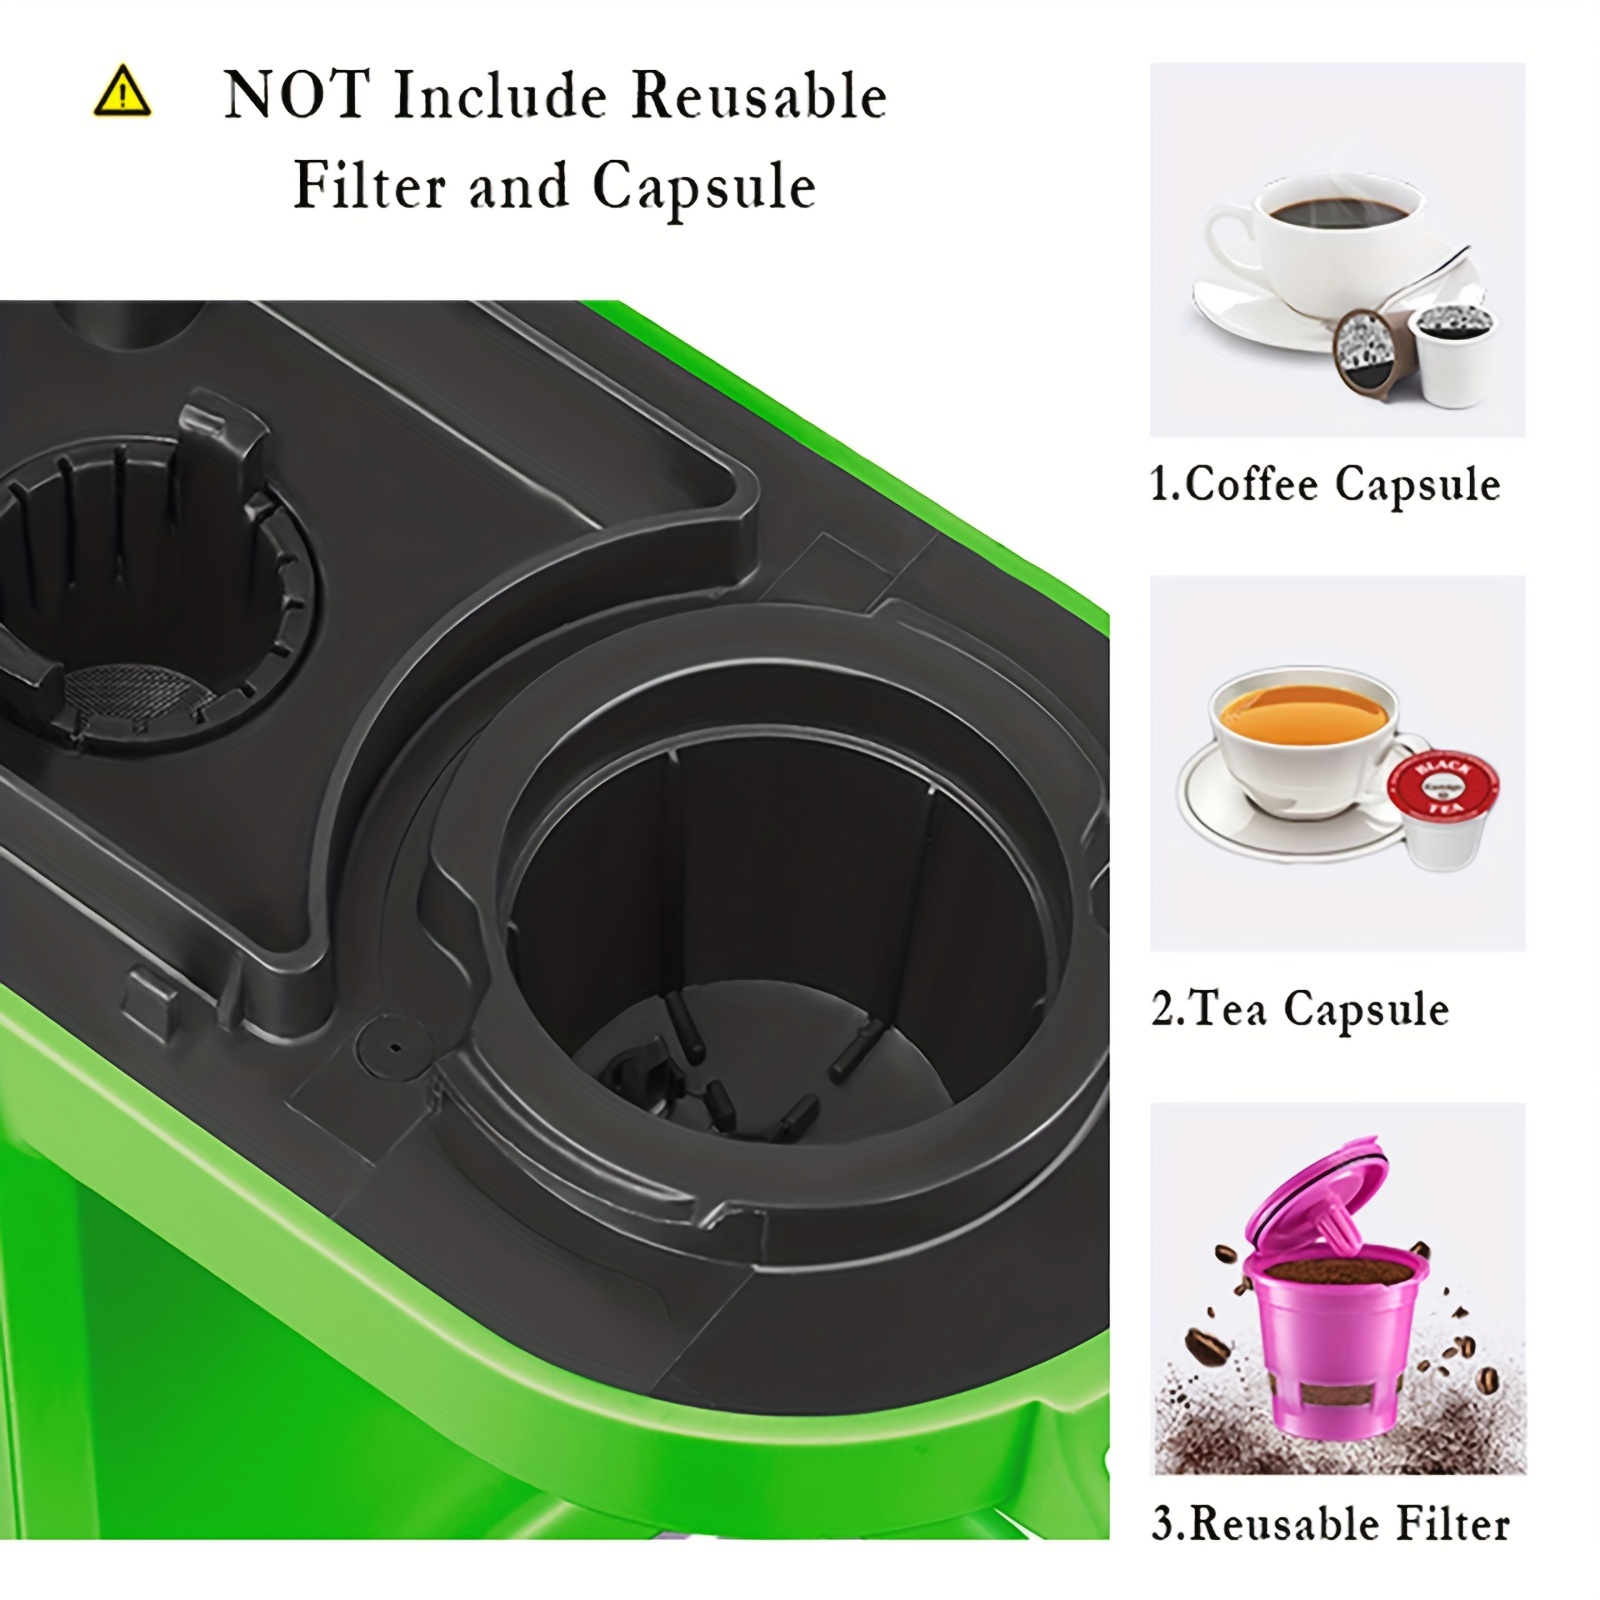 CHULUX Single Serve Coffee Maker with Removable Drip Tray,Green